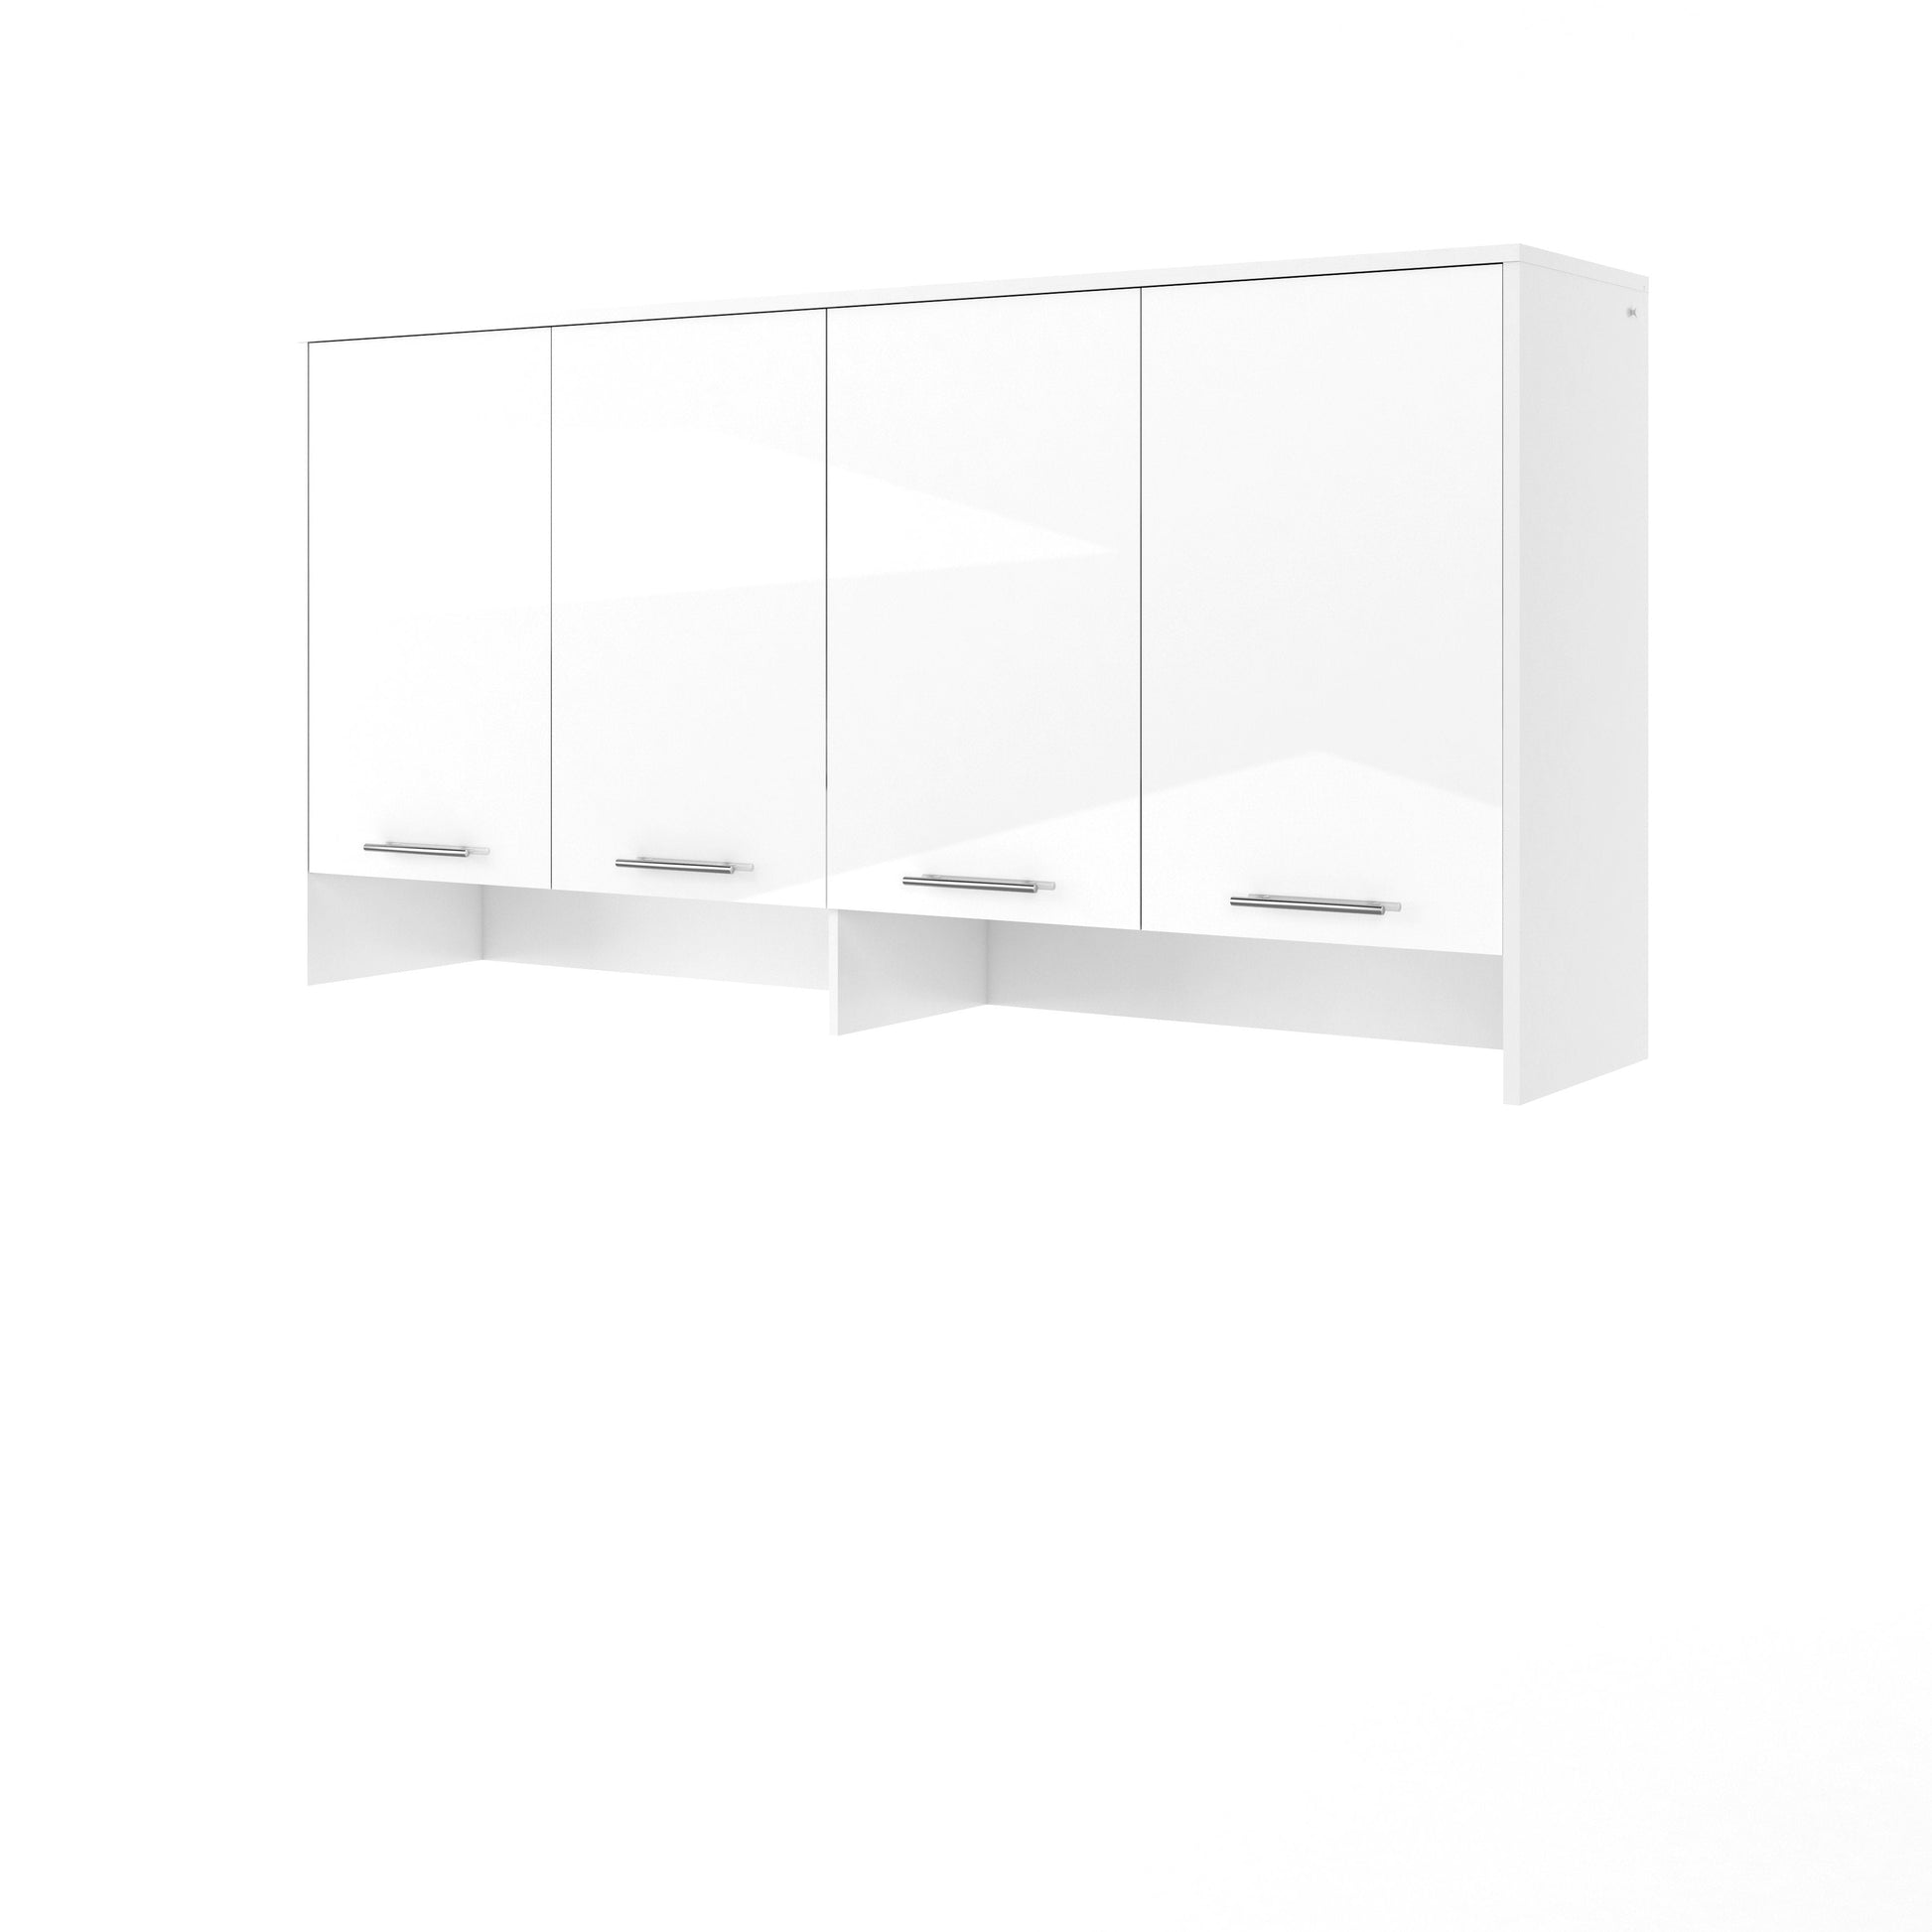 CP-11 Over Bed Unit for Horizontal Wall Bed Concept 90cm White Gloss Wall Bed with Storage Unit 